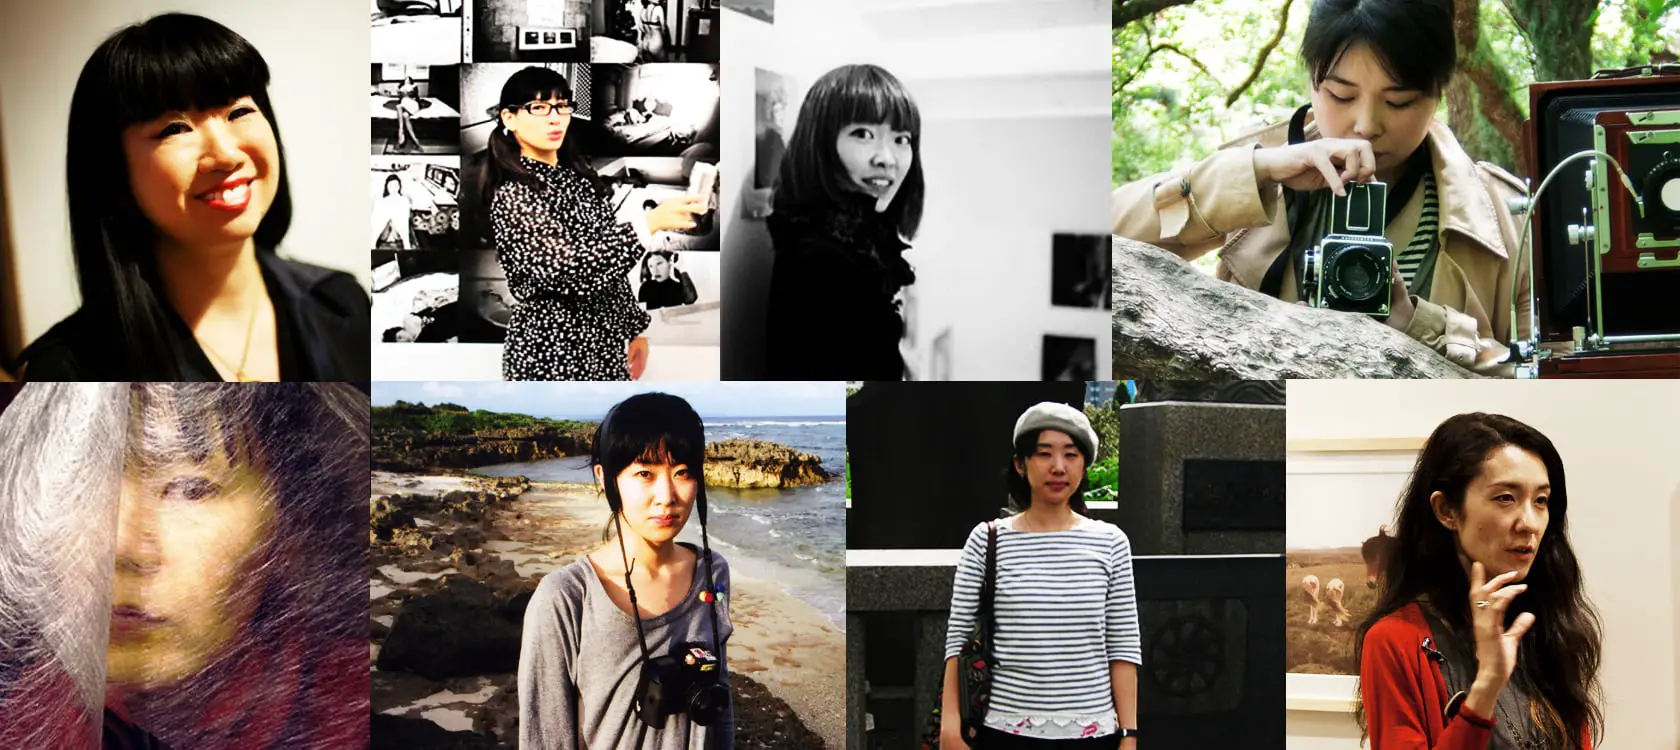 Japanese Female Film Photographers if you don’t know, now you know